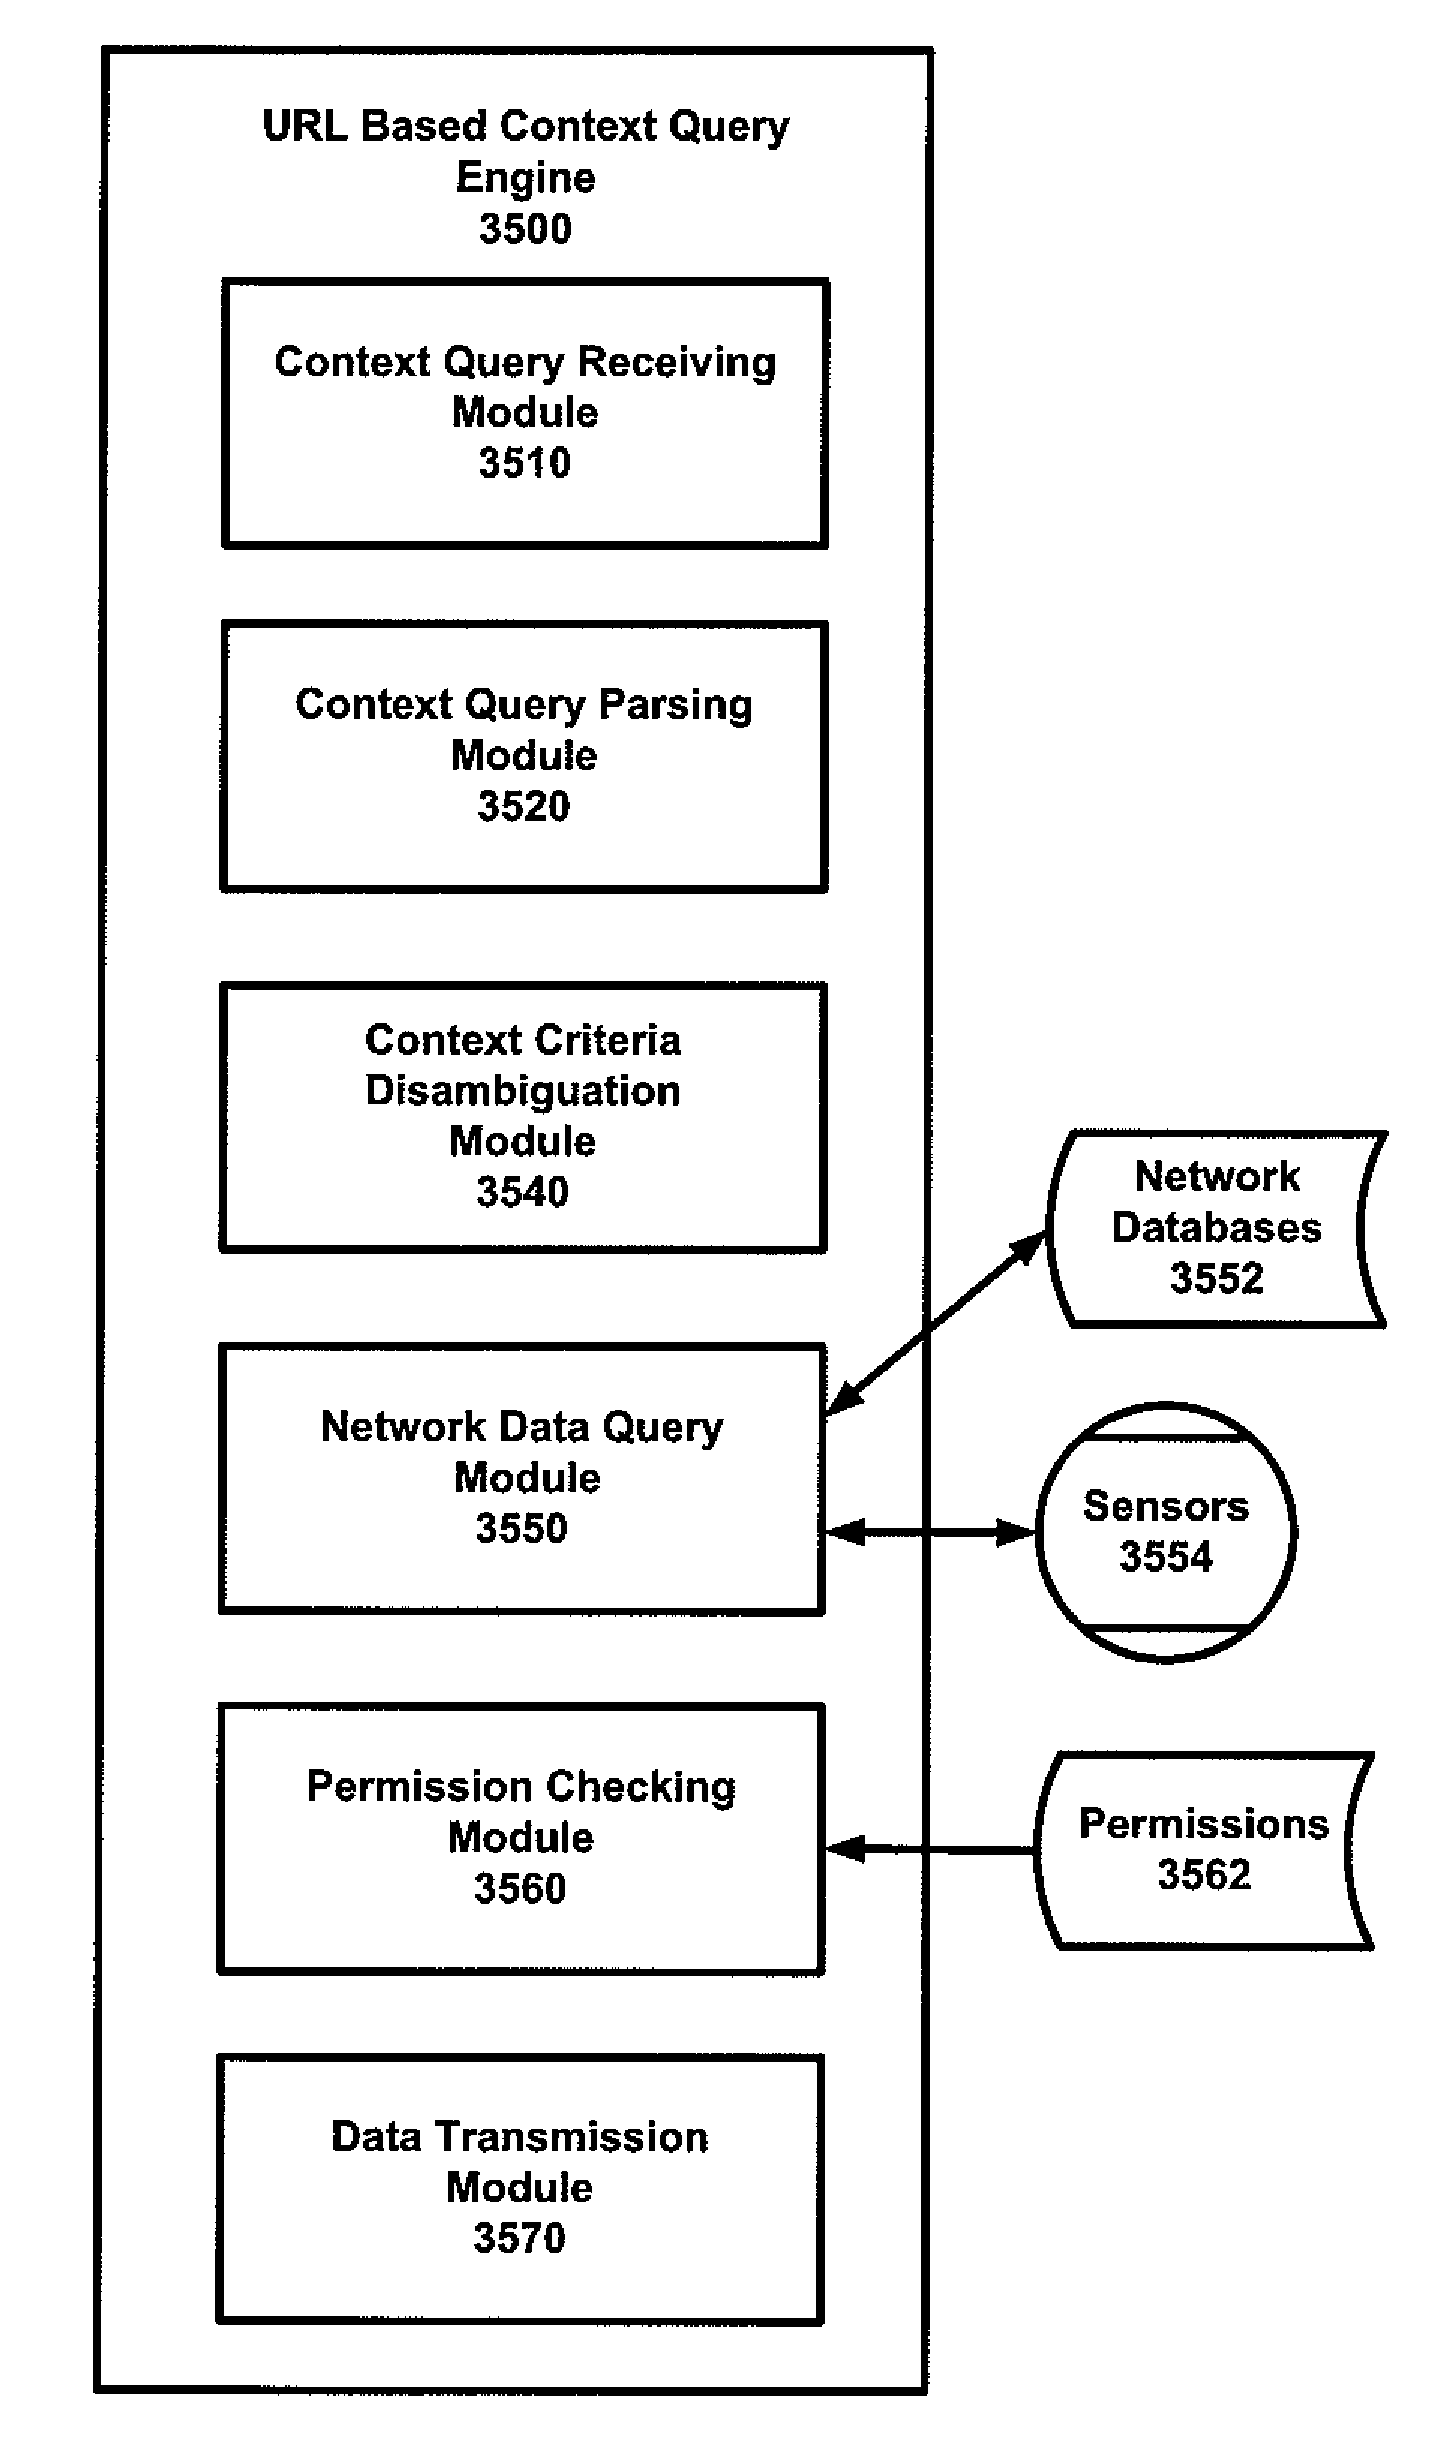 System and method for URL based query for retrieving data related to a context